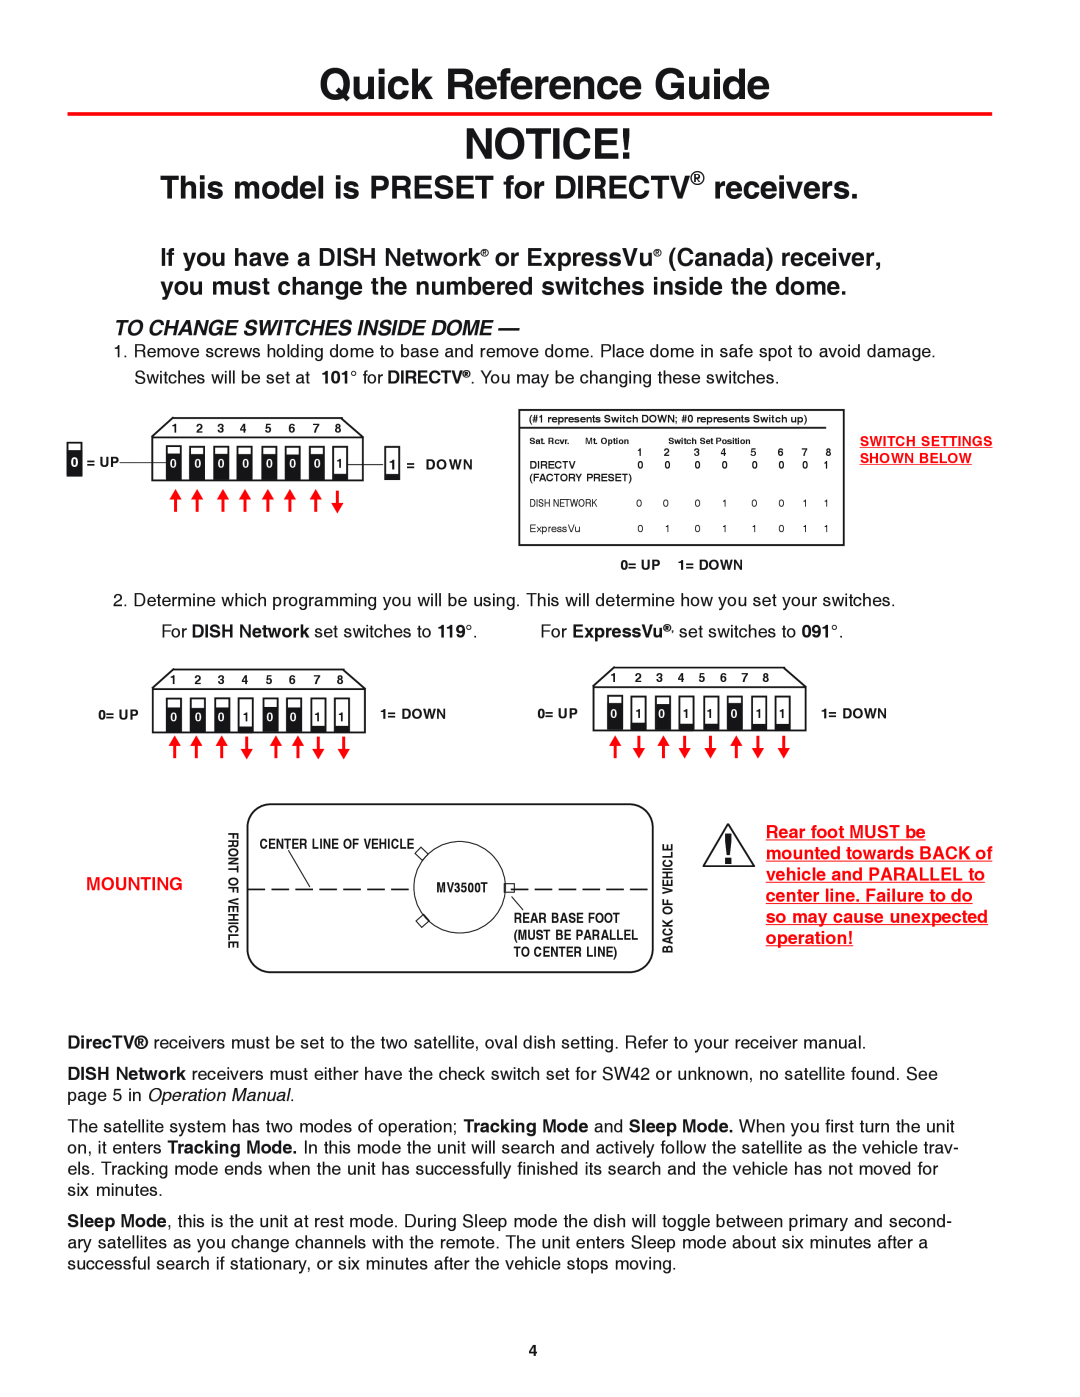 Winegard MVT-35B Quick Reference Guide NOTICE, This model is PRESET for DIRECTV receivers, To Change Switches Inside Dome 